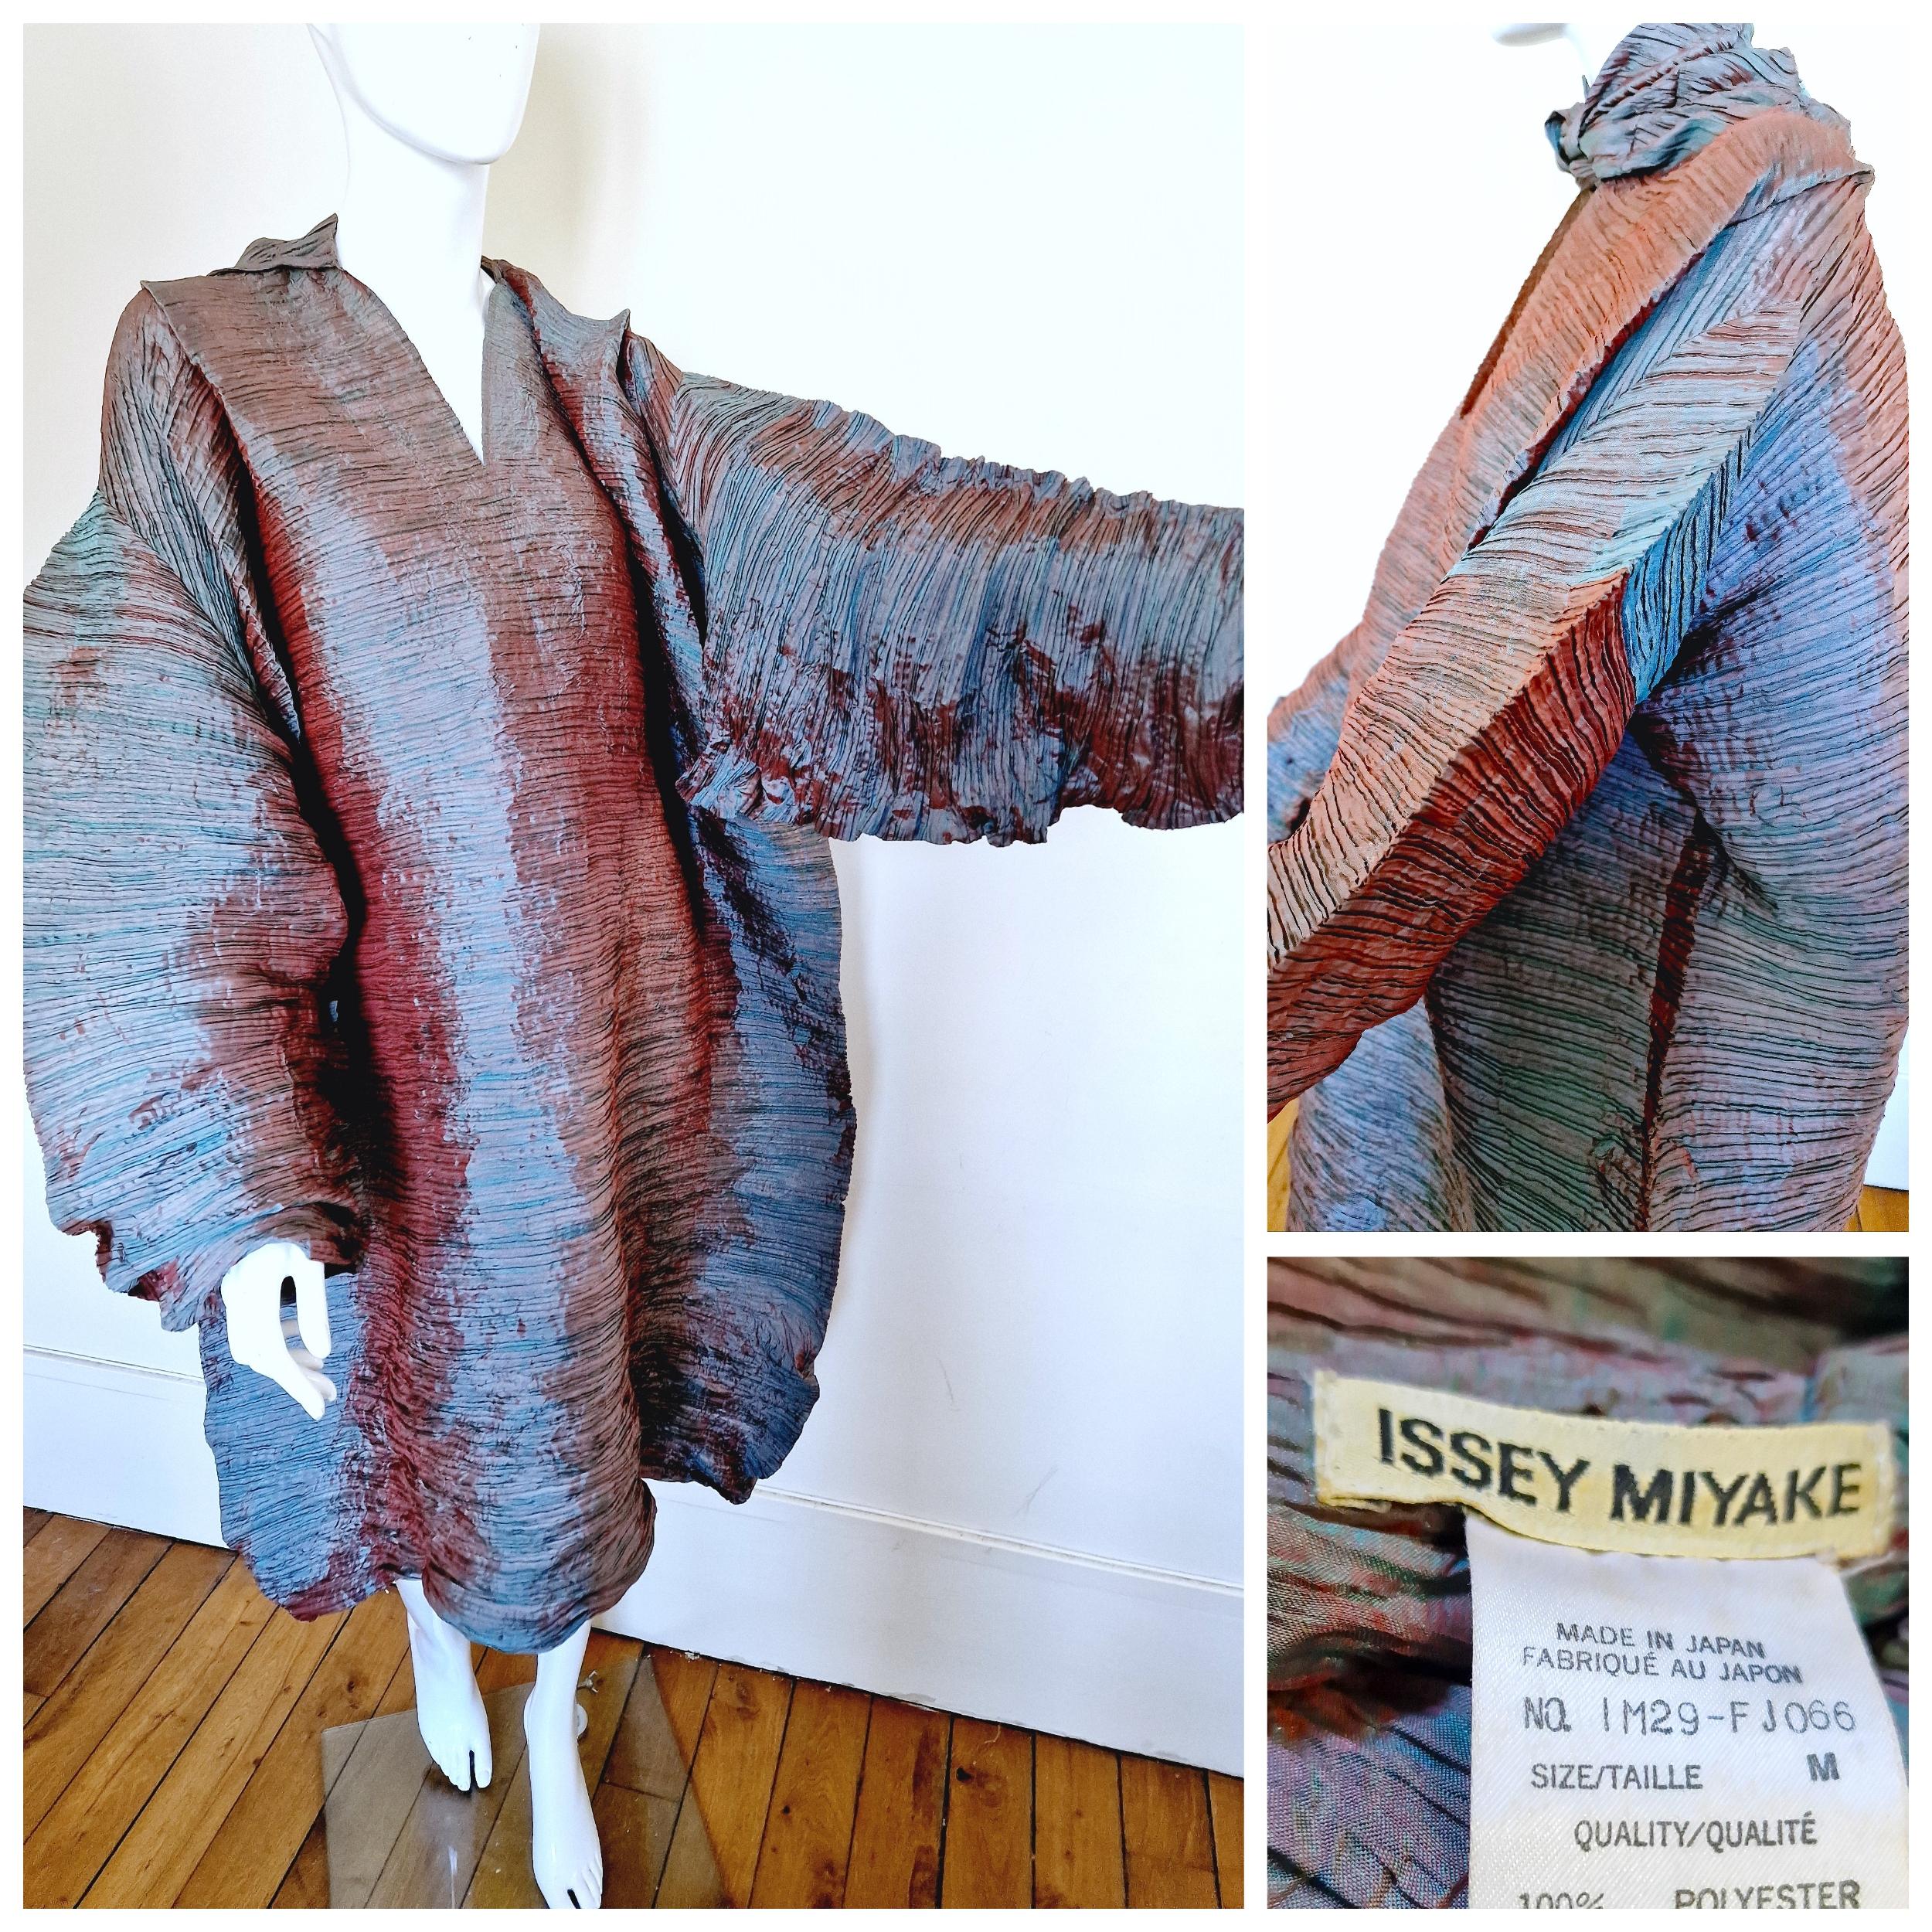 Rare Issey Miyake Metal Sculpture Oversize Pleated 80s 70s Vintage Dress Gown For Sale 11